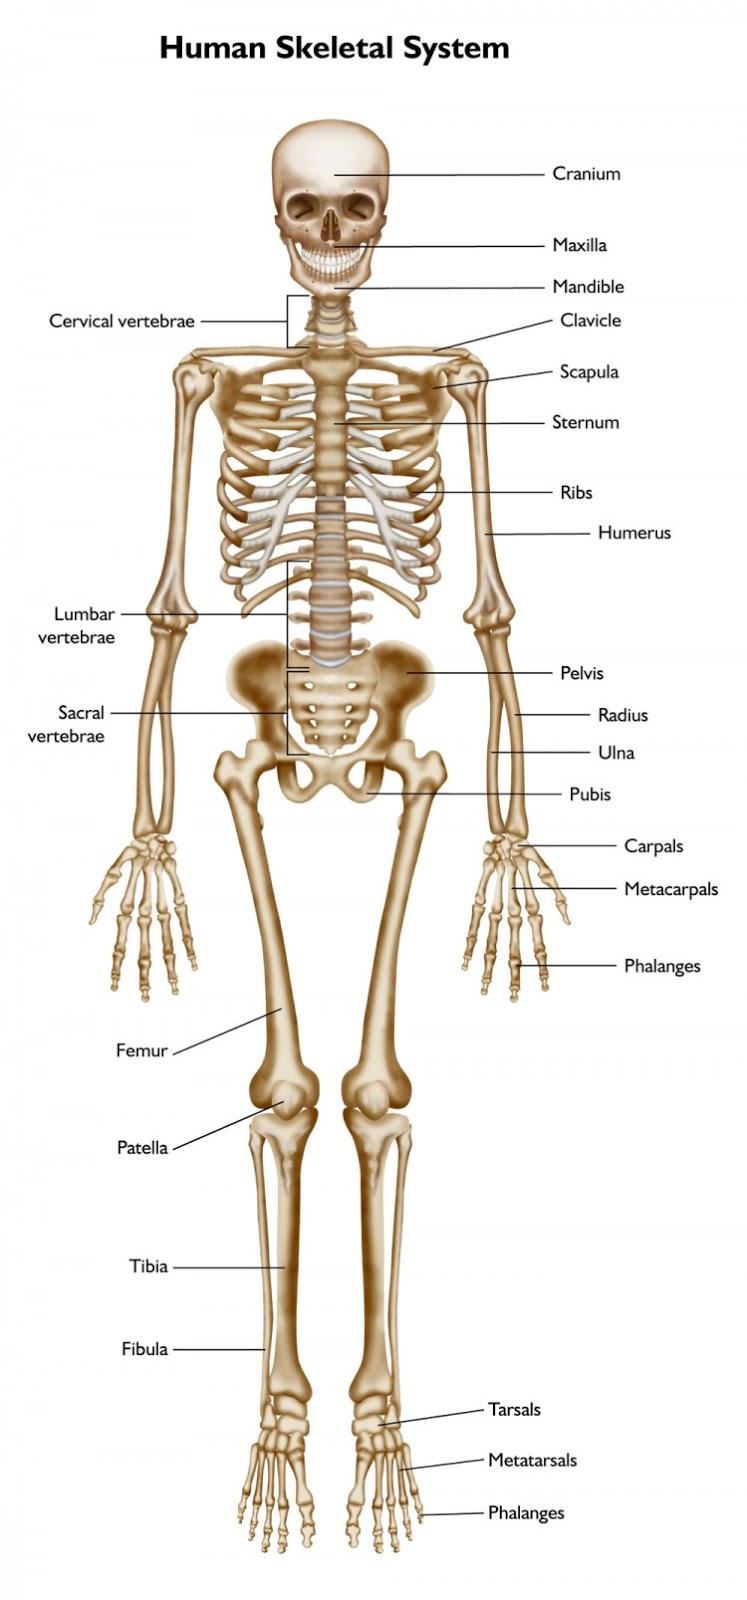 Learning Adventures in the Big Third Grade: Bones In Our Leg